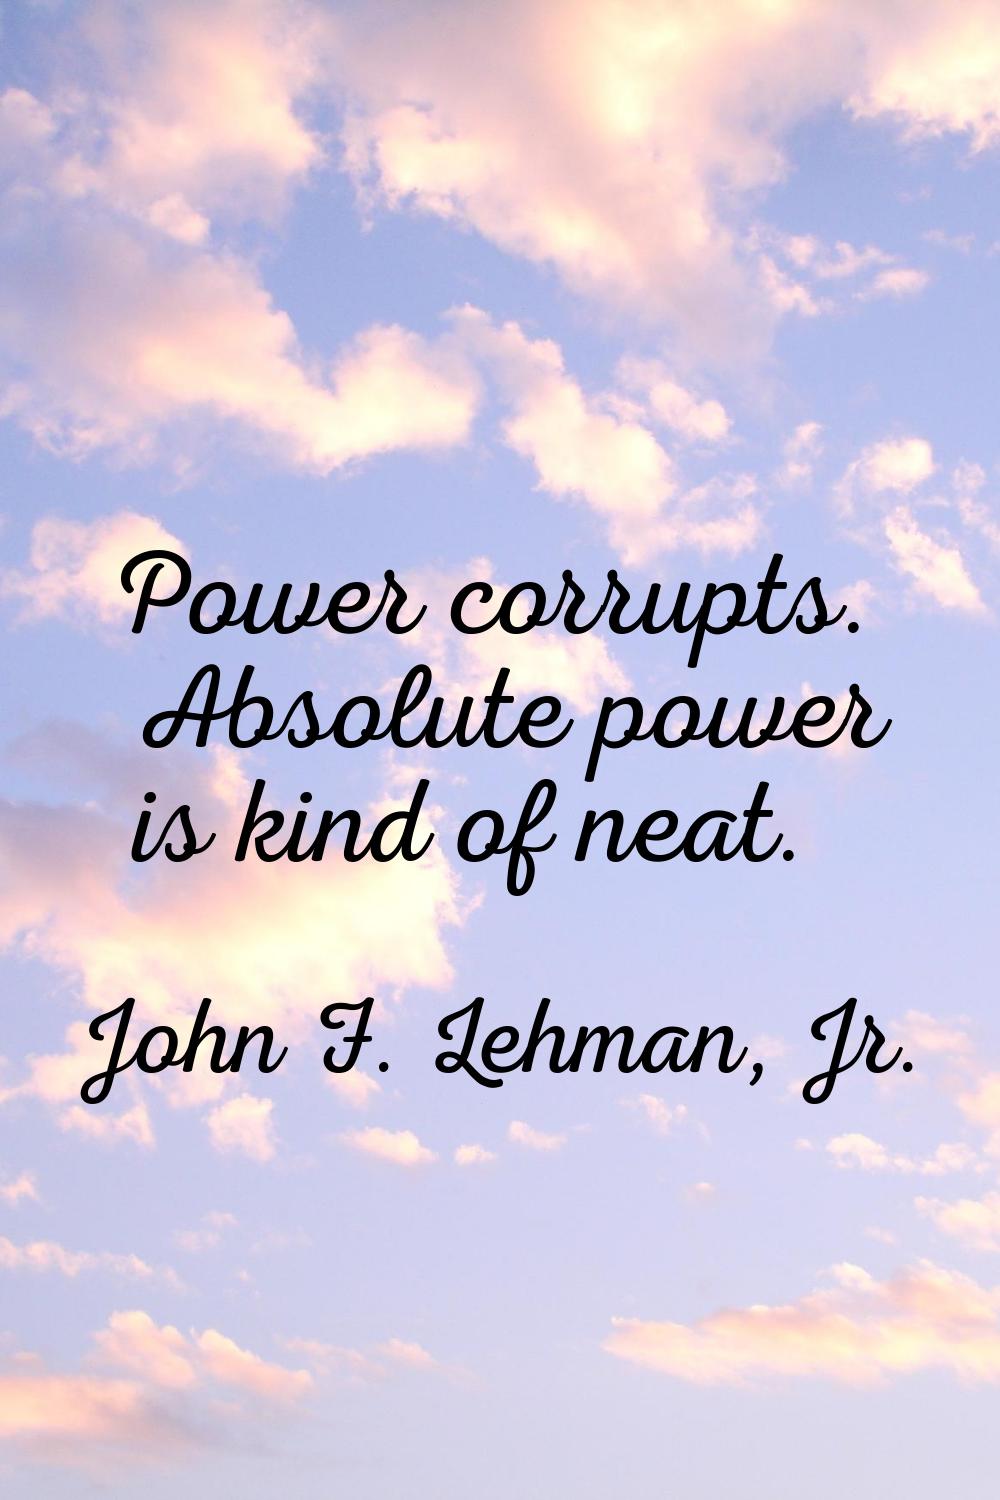 Power corrupts. Absolute power is kind of neat.